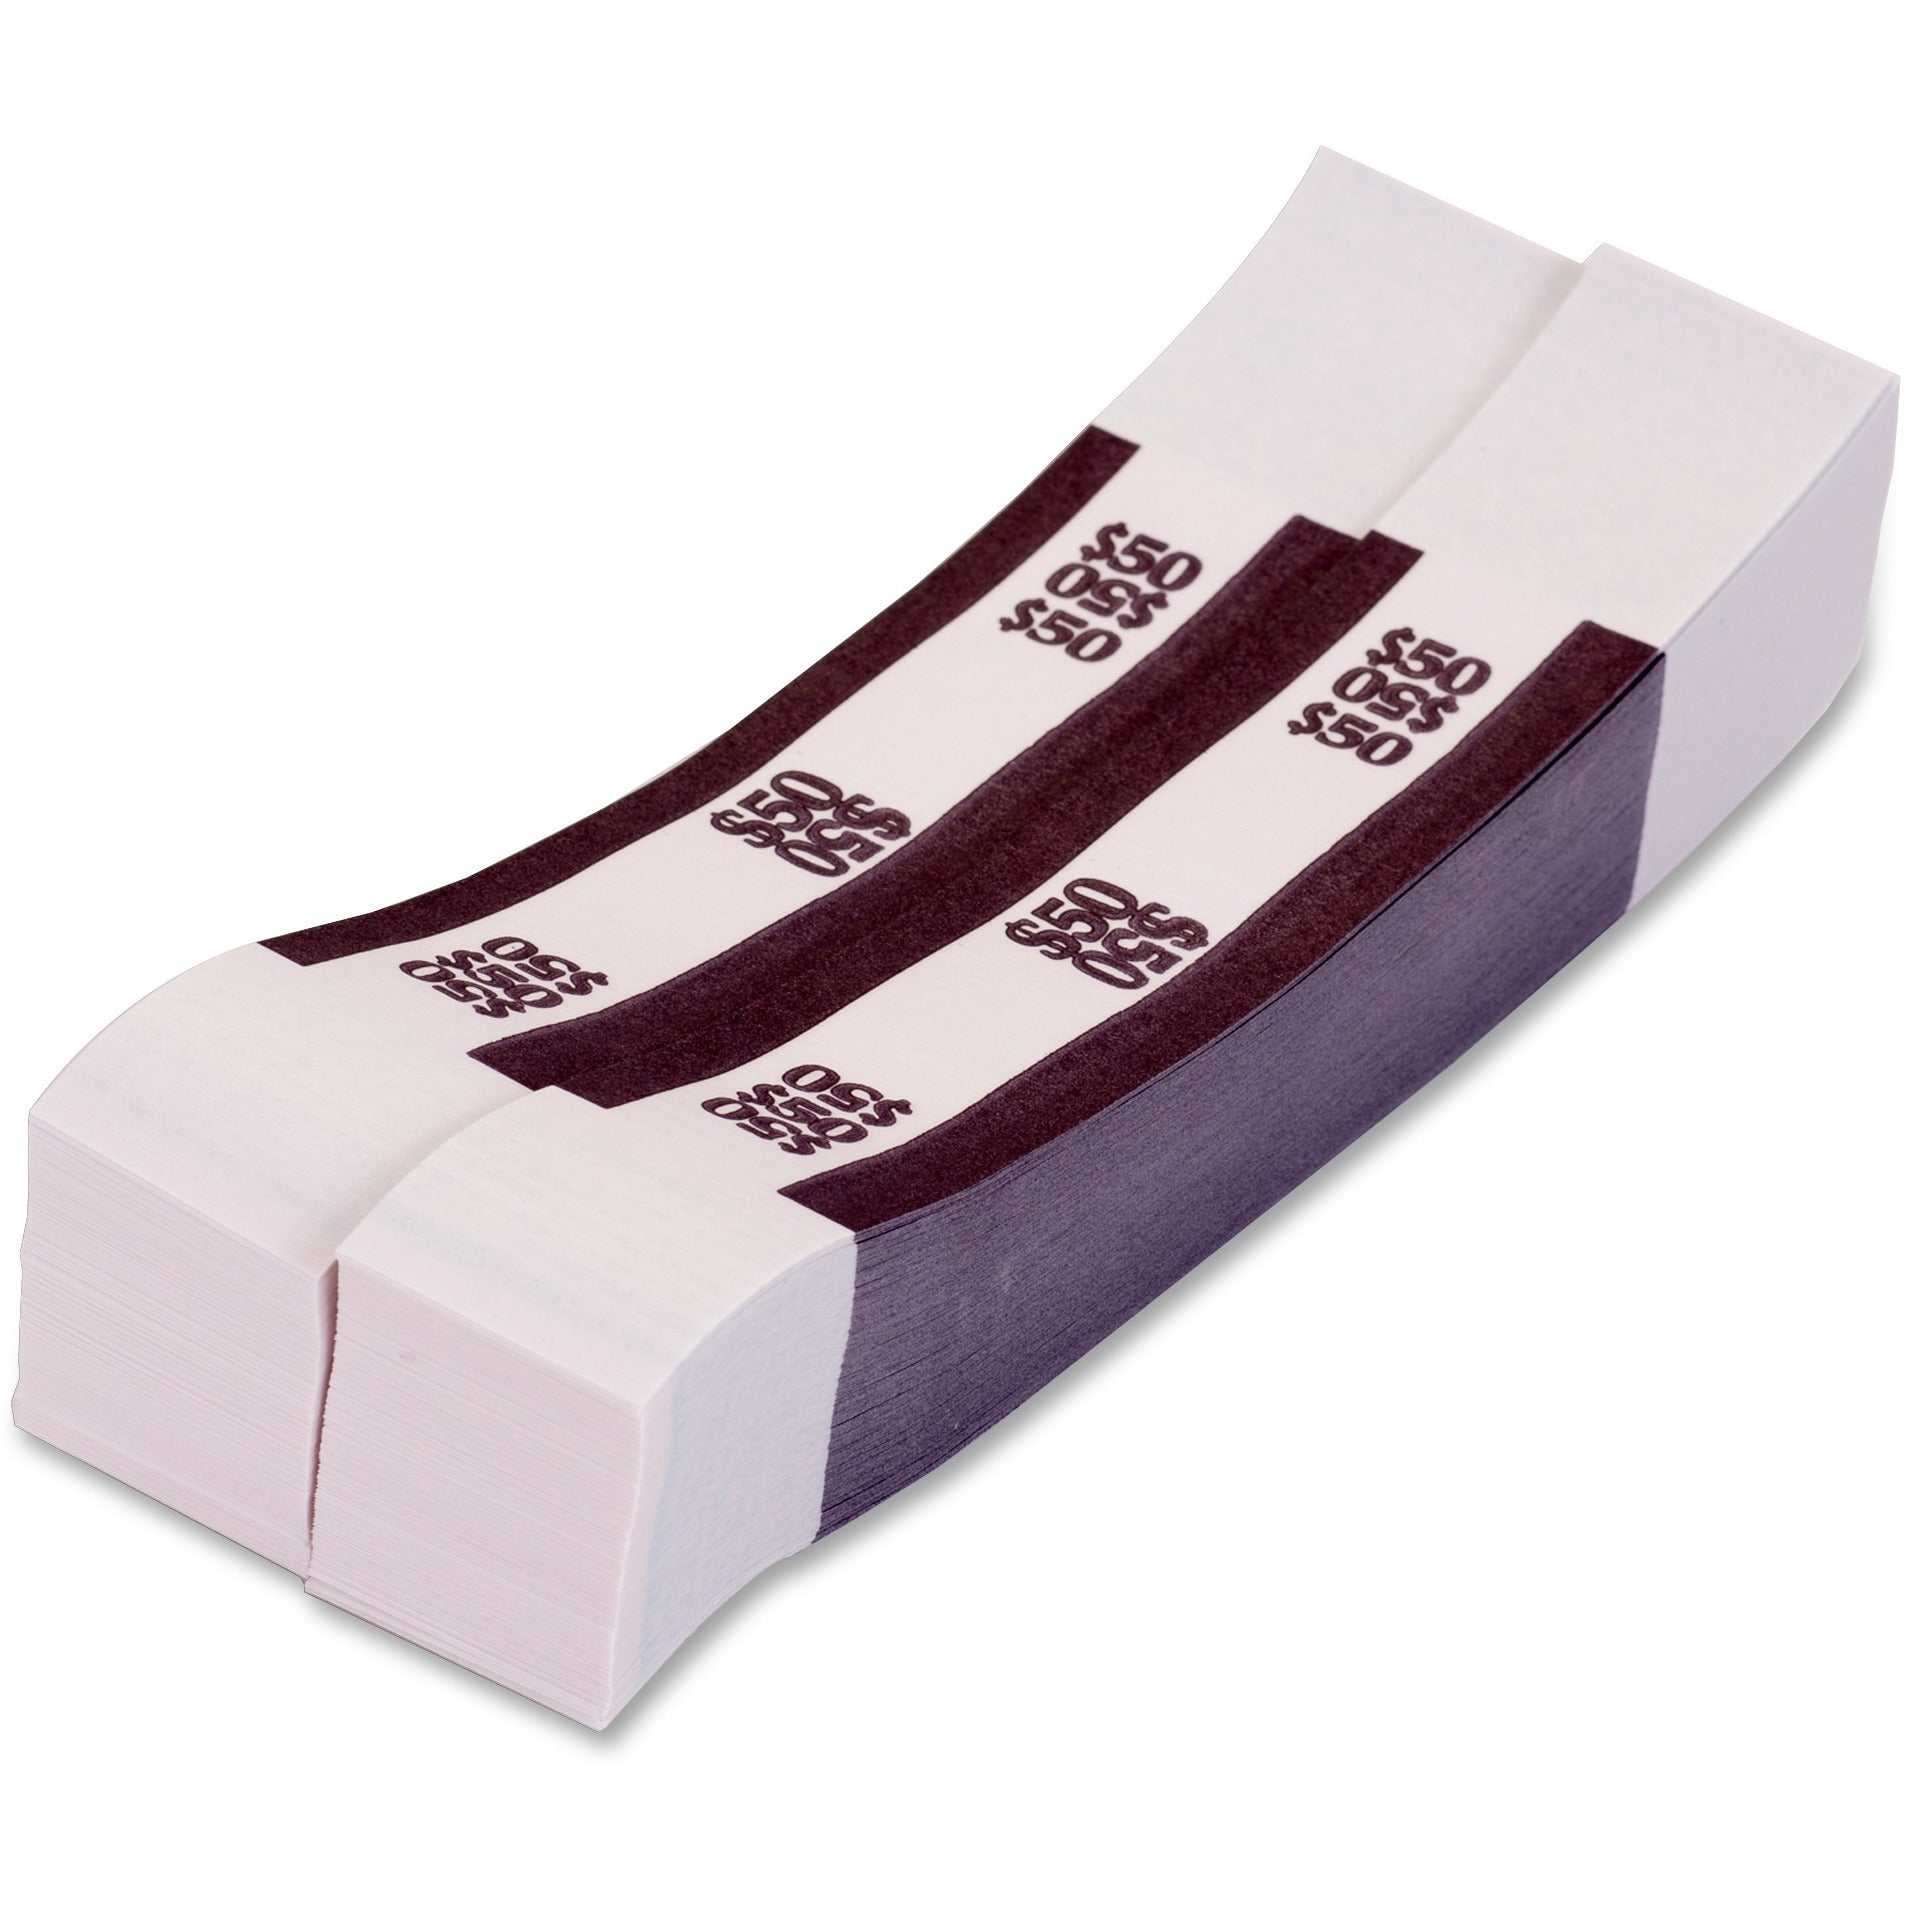 pap-r-currency-straps-125-width-self-sealing-self-adhesive-durable-20-lb-basis-weight-kraft-white-violet-1000-pack_pqp400075 - 3